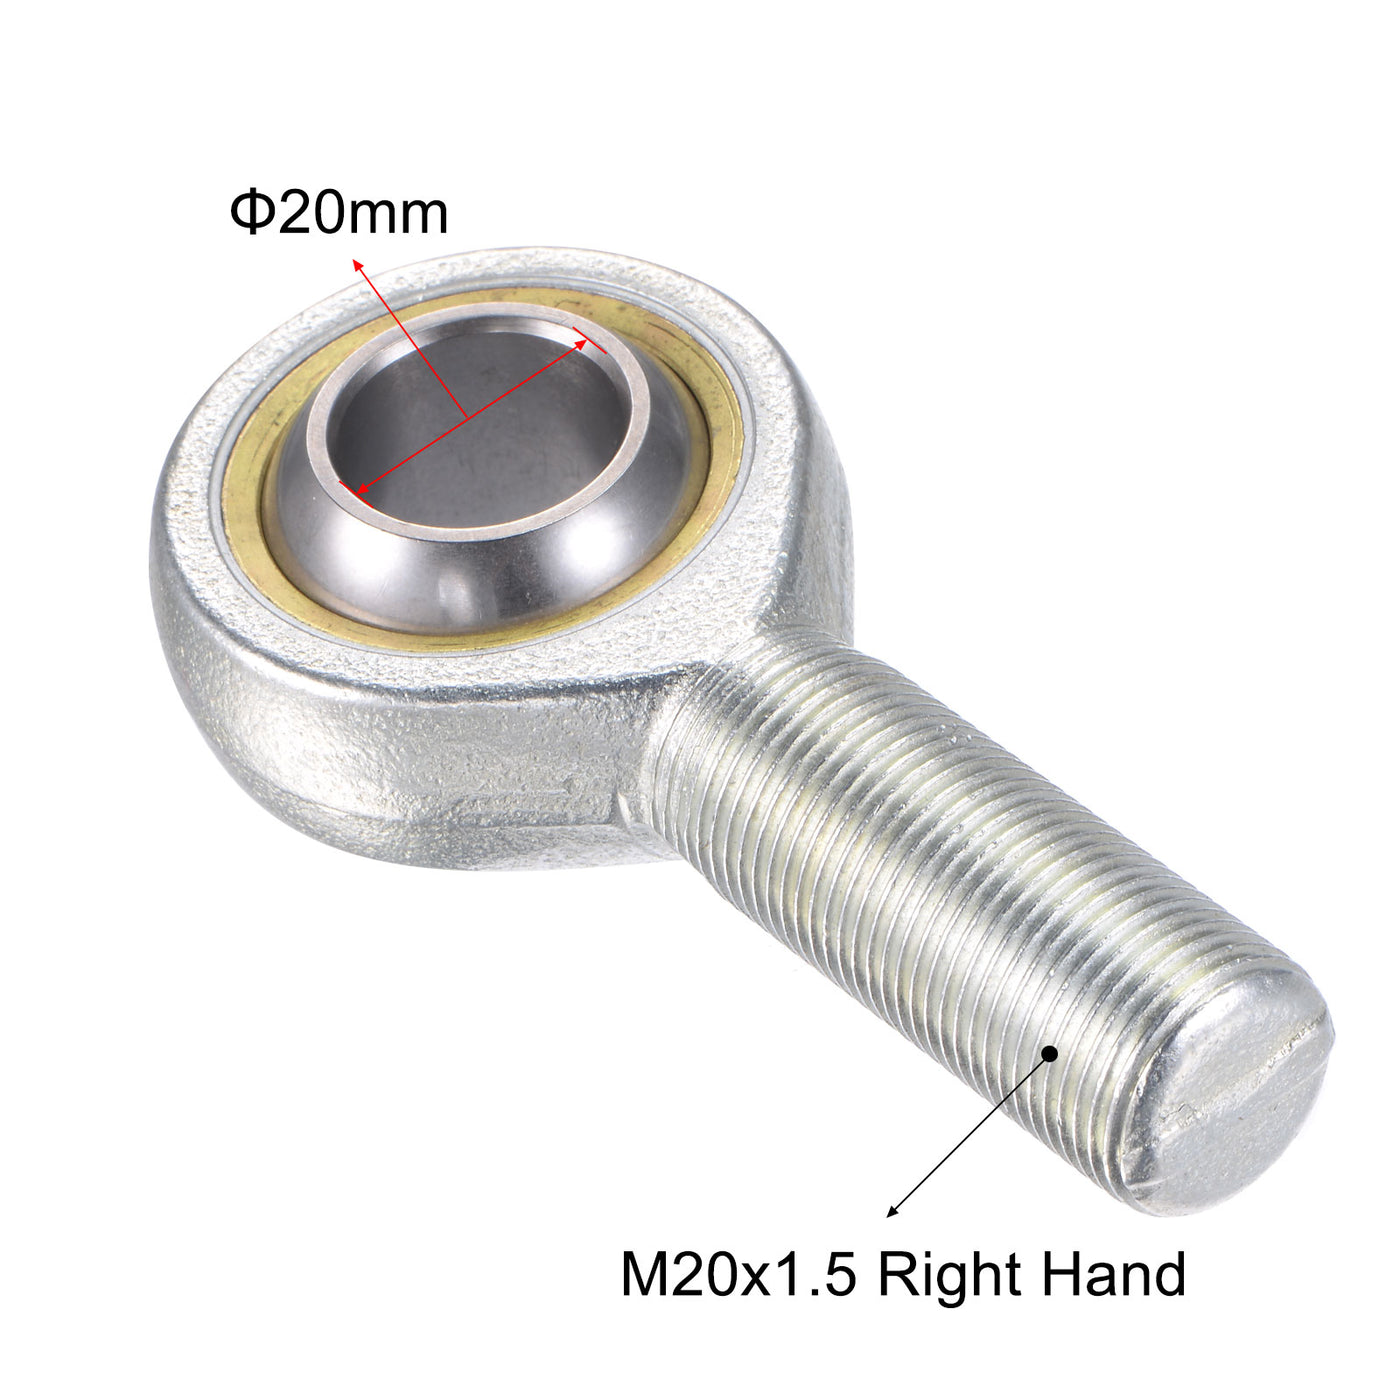 uxcell Uxcell SA20TK POSA20 Rod End Bearing 20mm Bore M20x1.5 Right Hand Male Thread